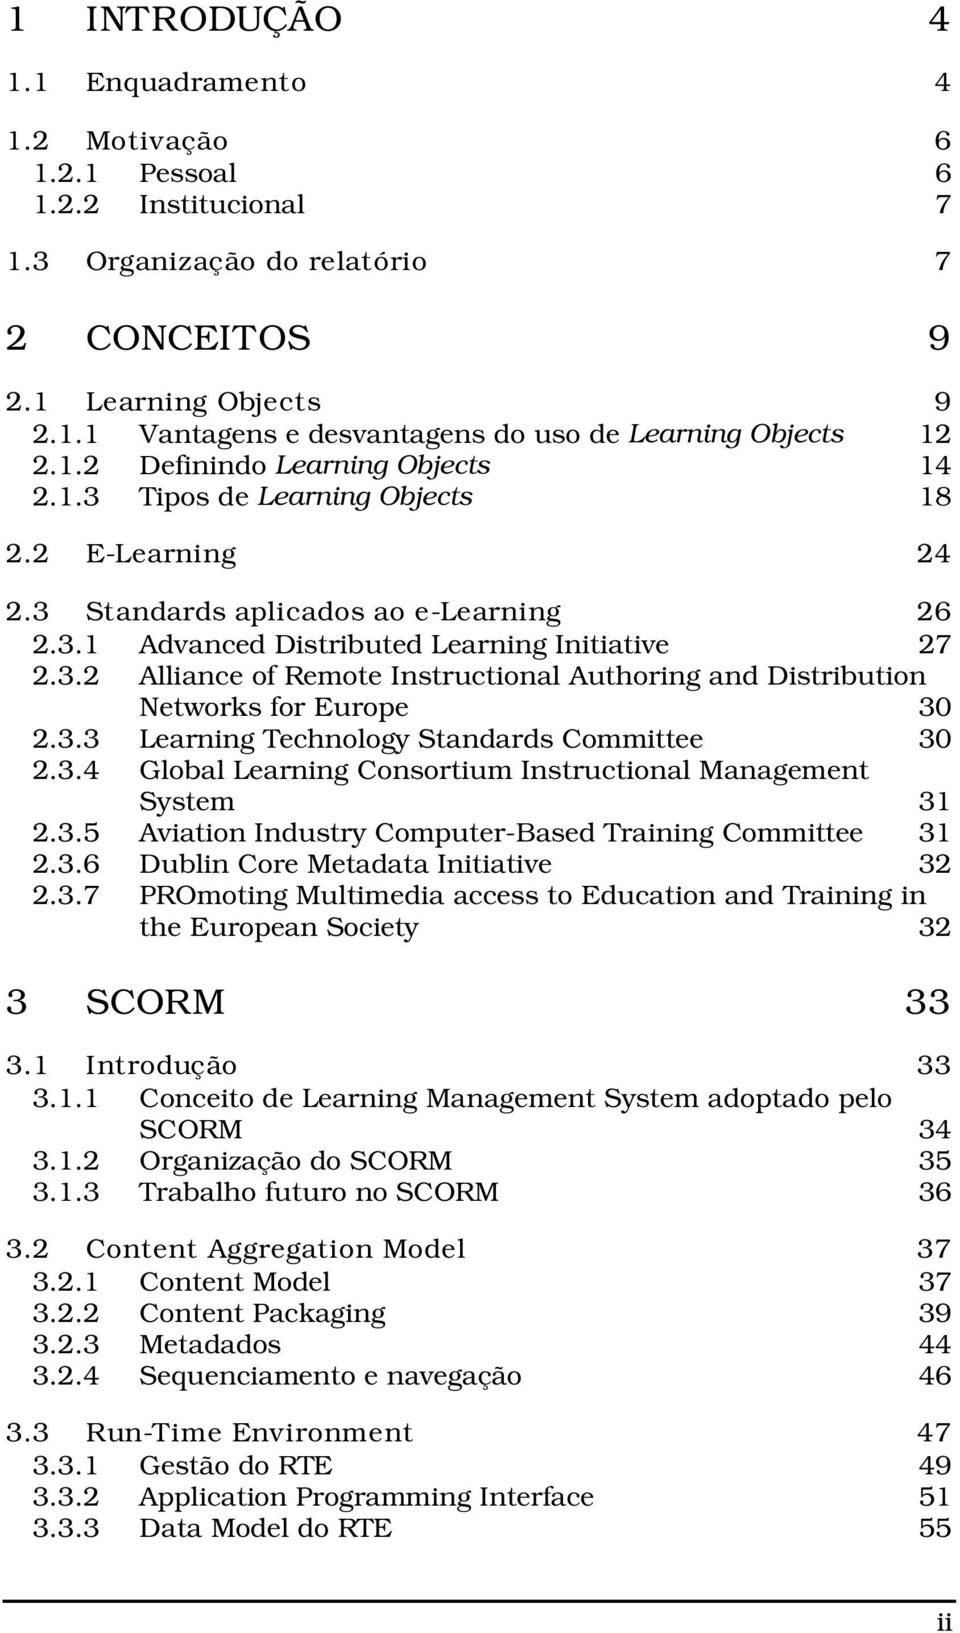 3.3 Learning Technology Standards Committee 30 2.3.4 Global Learning Consortium Instructional Management System 31 2.3.5 Aviation Industry Computer-Based Training Committee 31 2.3.6 Dublin Core Metadata Initiative 32 2.